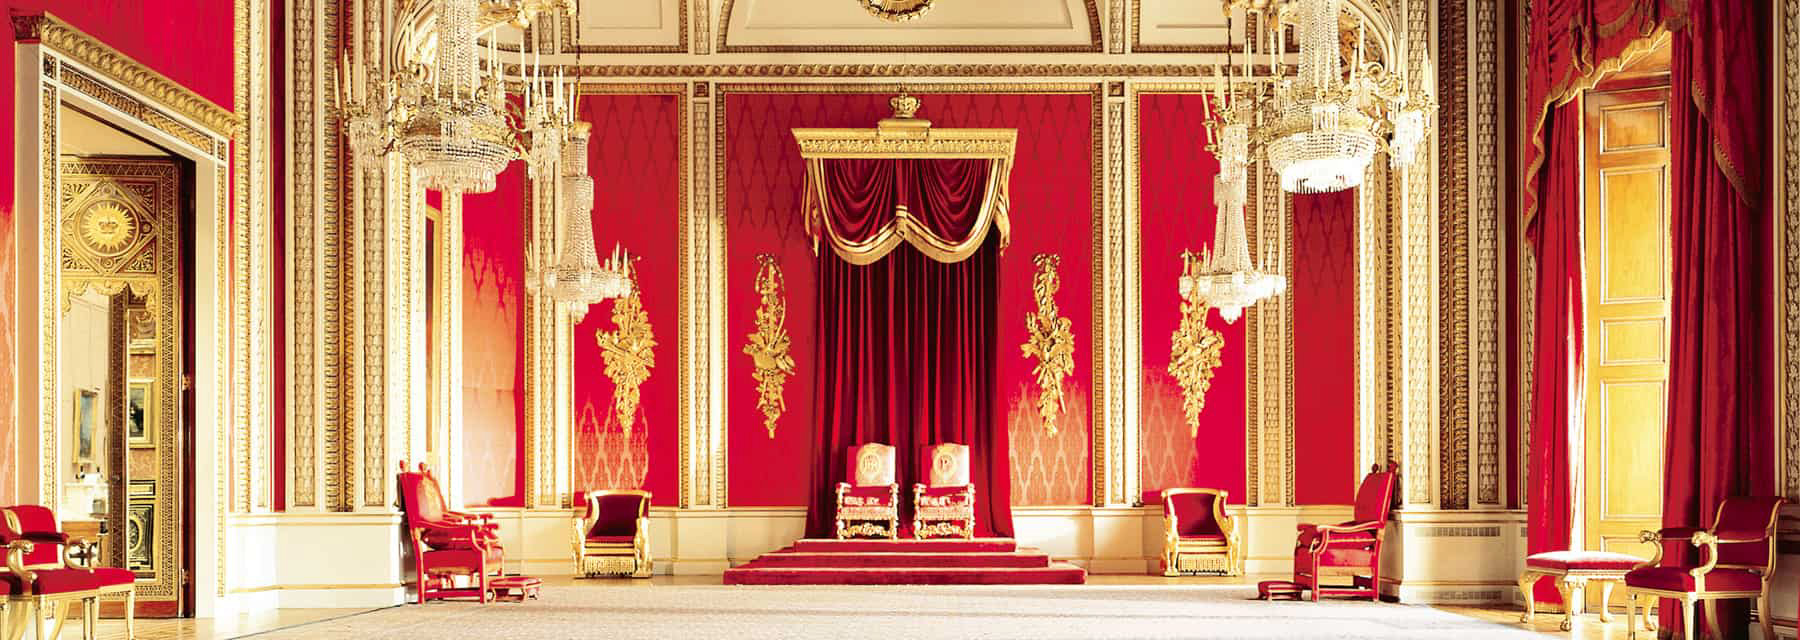 buckingham palace state rooms tour